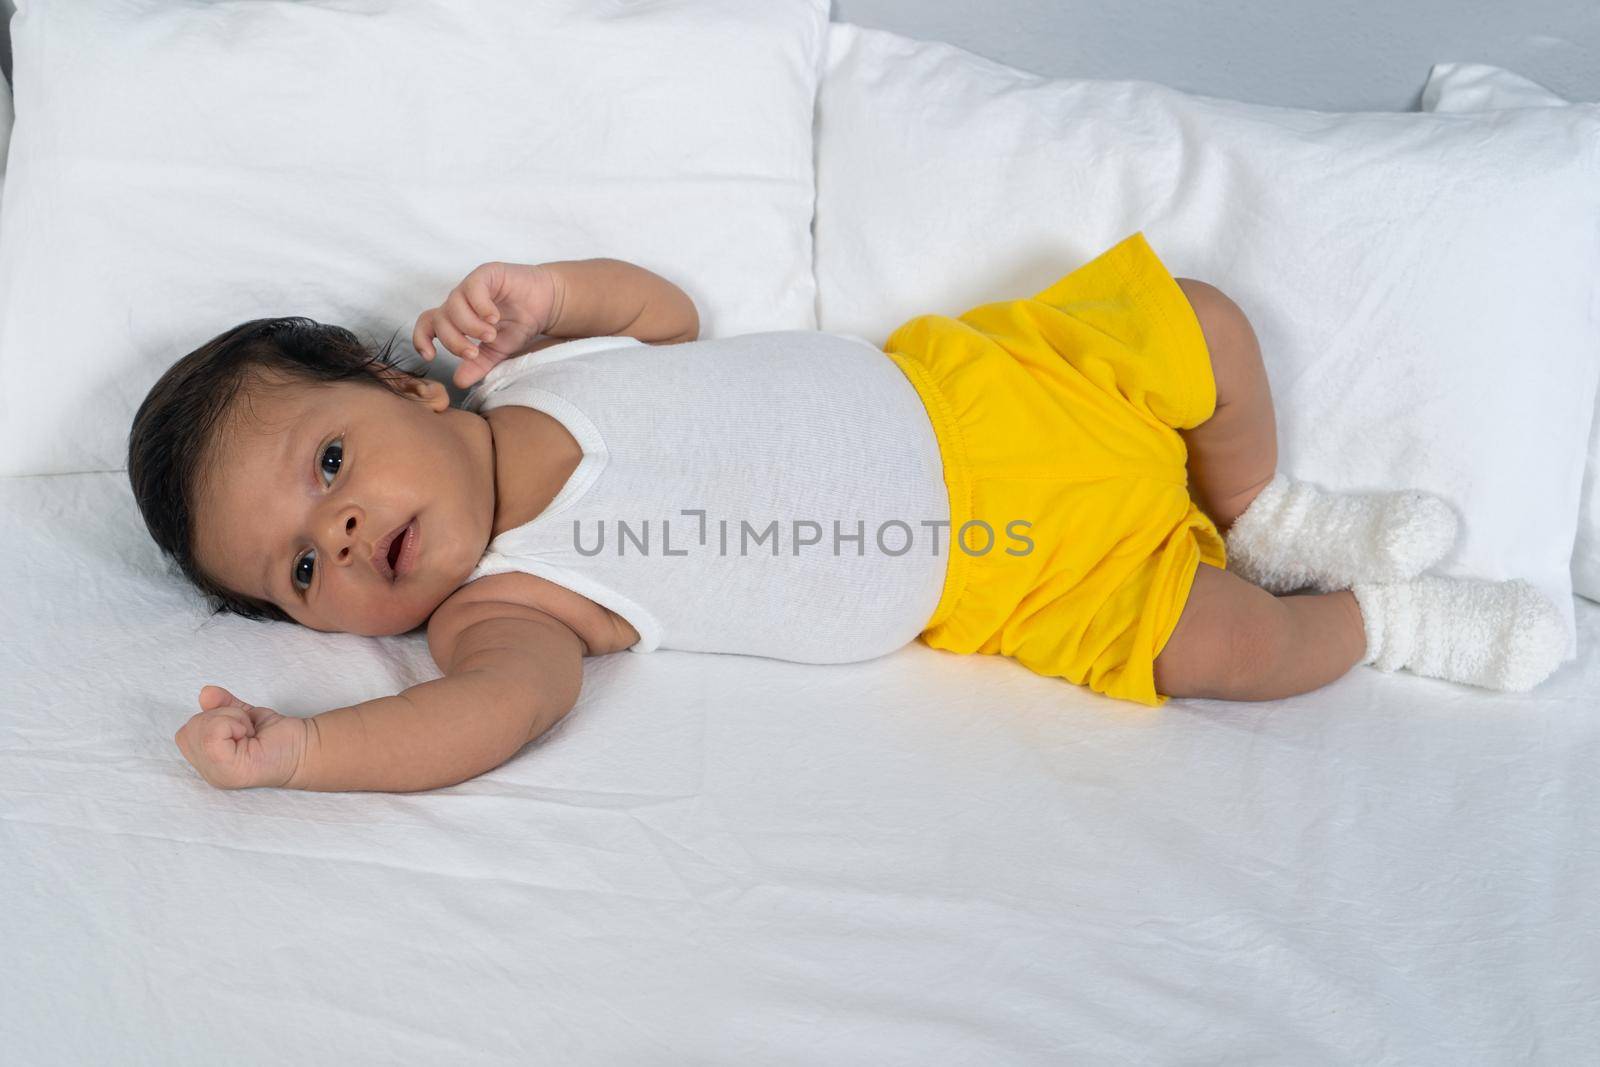 Infant lying on his back wearing a white t-shirt and yellow shorts